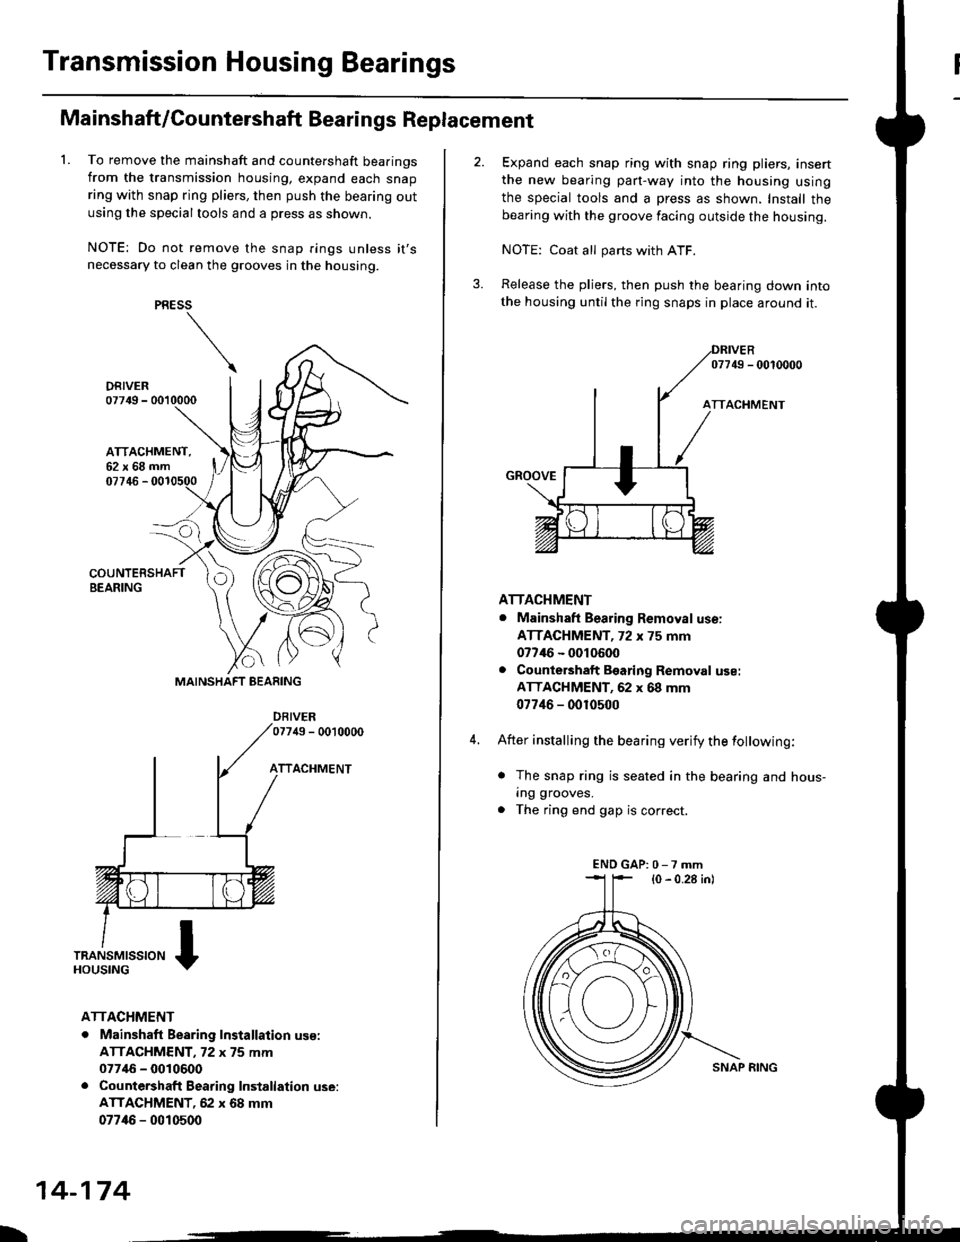 HONDA CIVIC 1996 6.G Workshop Manual Transmission Housing Bearings
L
Mainshaft/Countershaft Bearings Replacement
To remove the mainshaft and countershaft bearings
from the transmission housing, expand each snap
ring with snap ring pliers